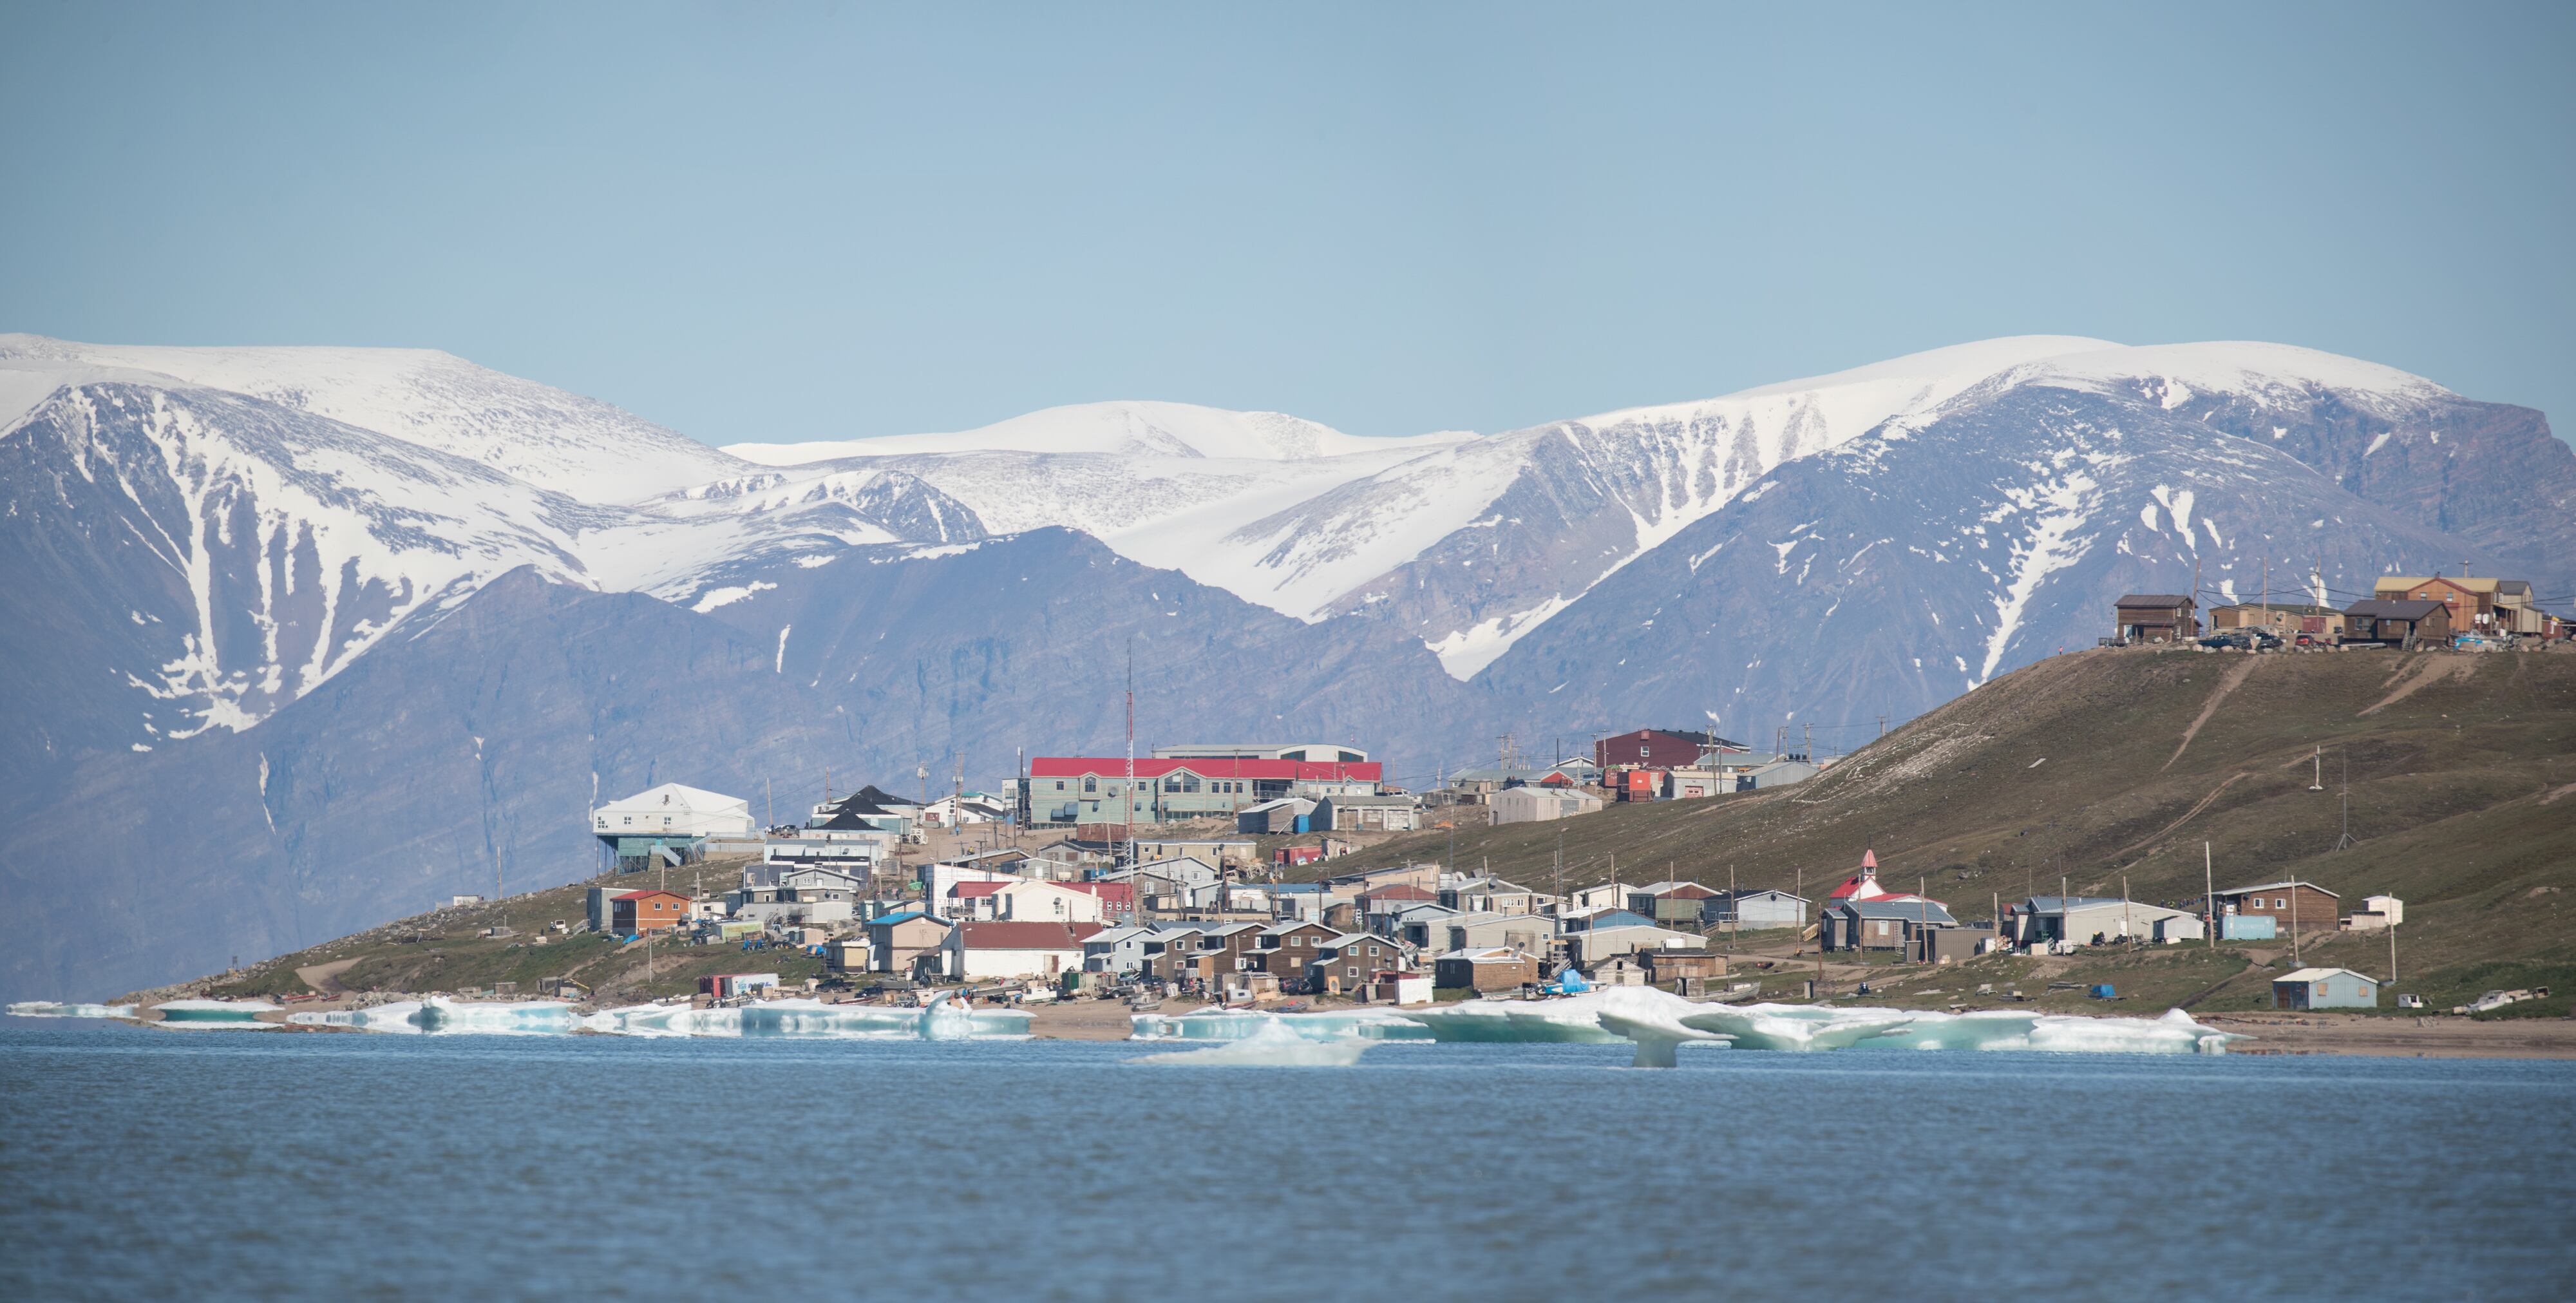 Pond Inlet on Baffin Island is one of the Inuit communities in the Canadian arctic facing a TB outbreak.